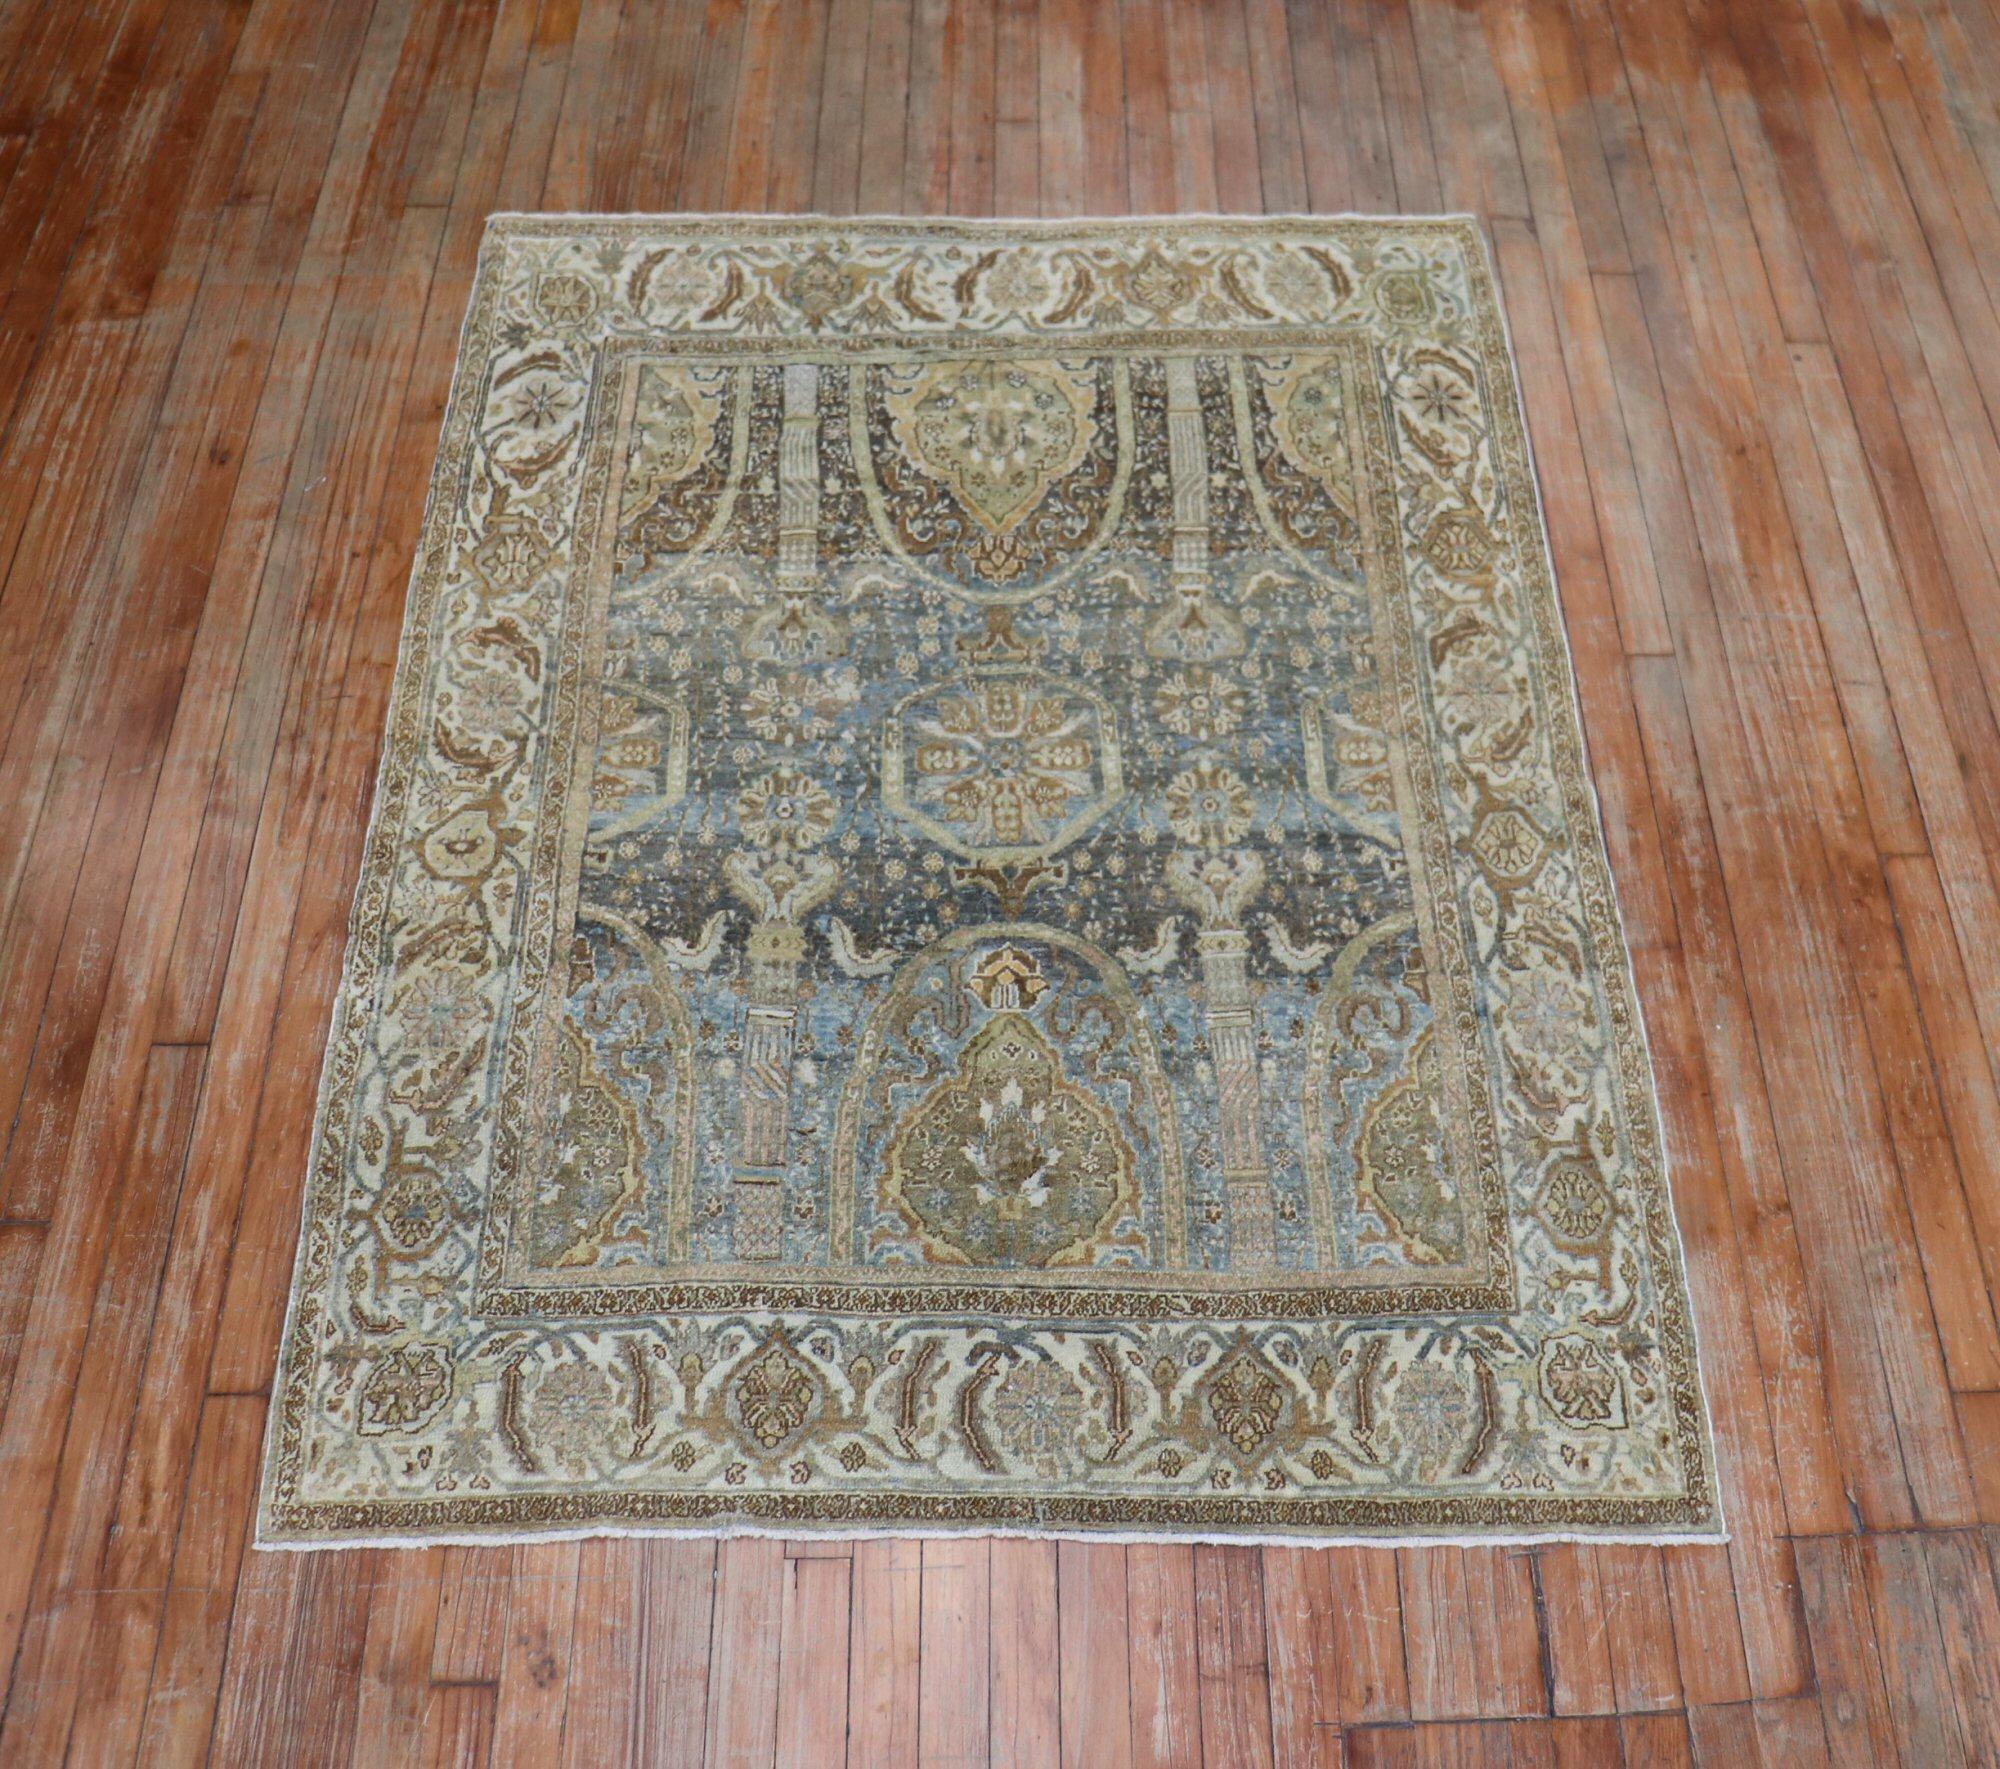 An appealing early 20th century Persian Senneh city weave rug with a captivating large-scale design in green and brown.

Size: 4'2